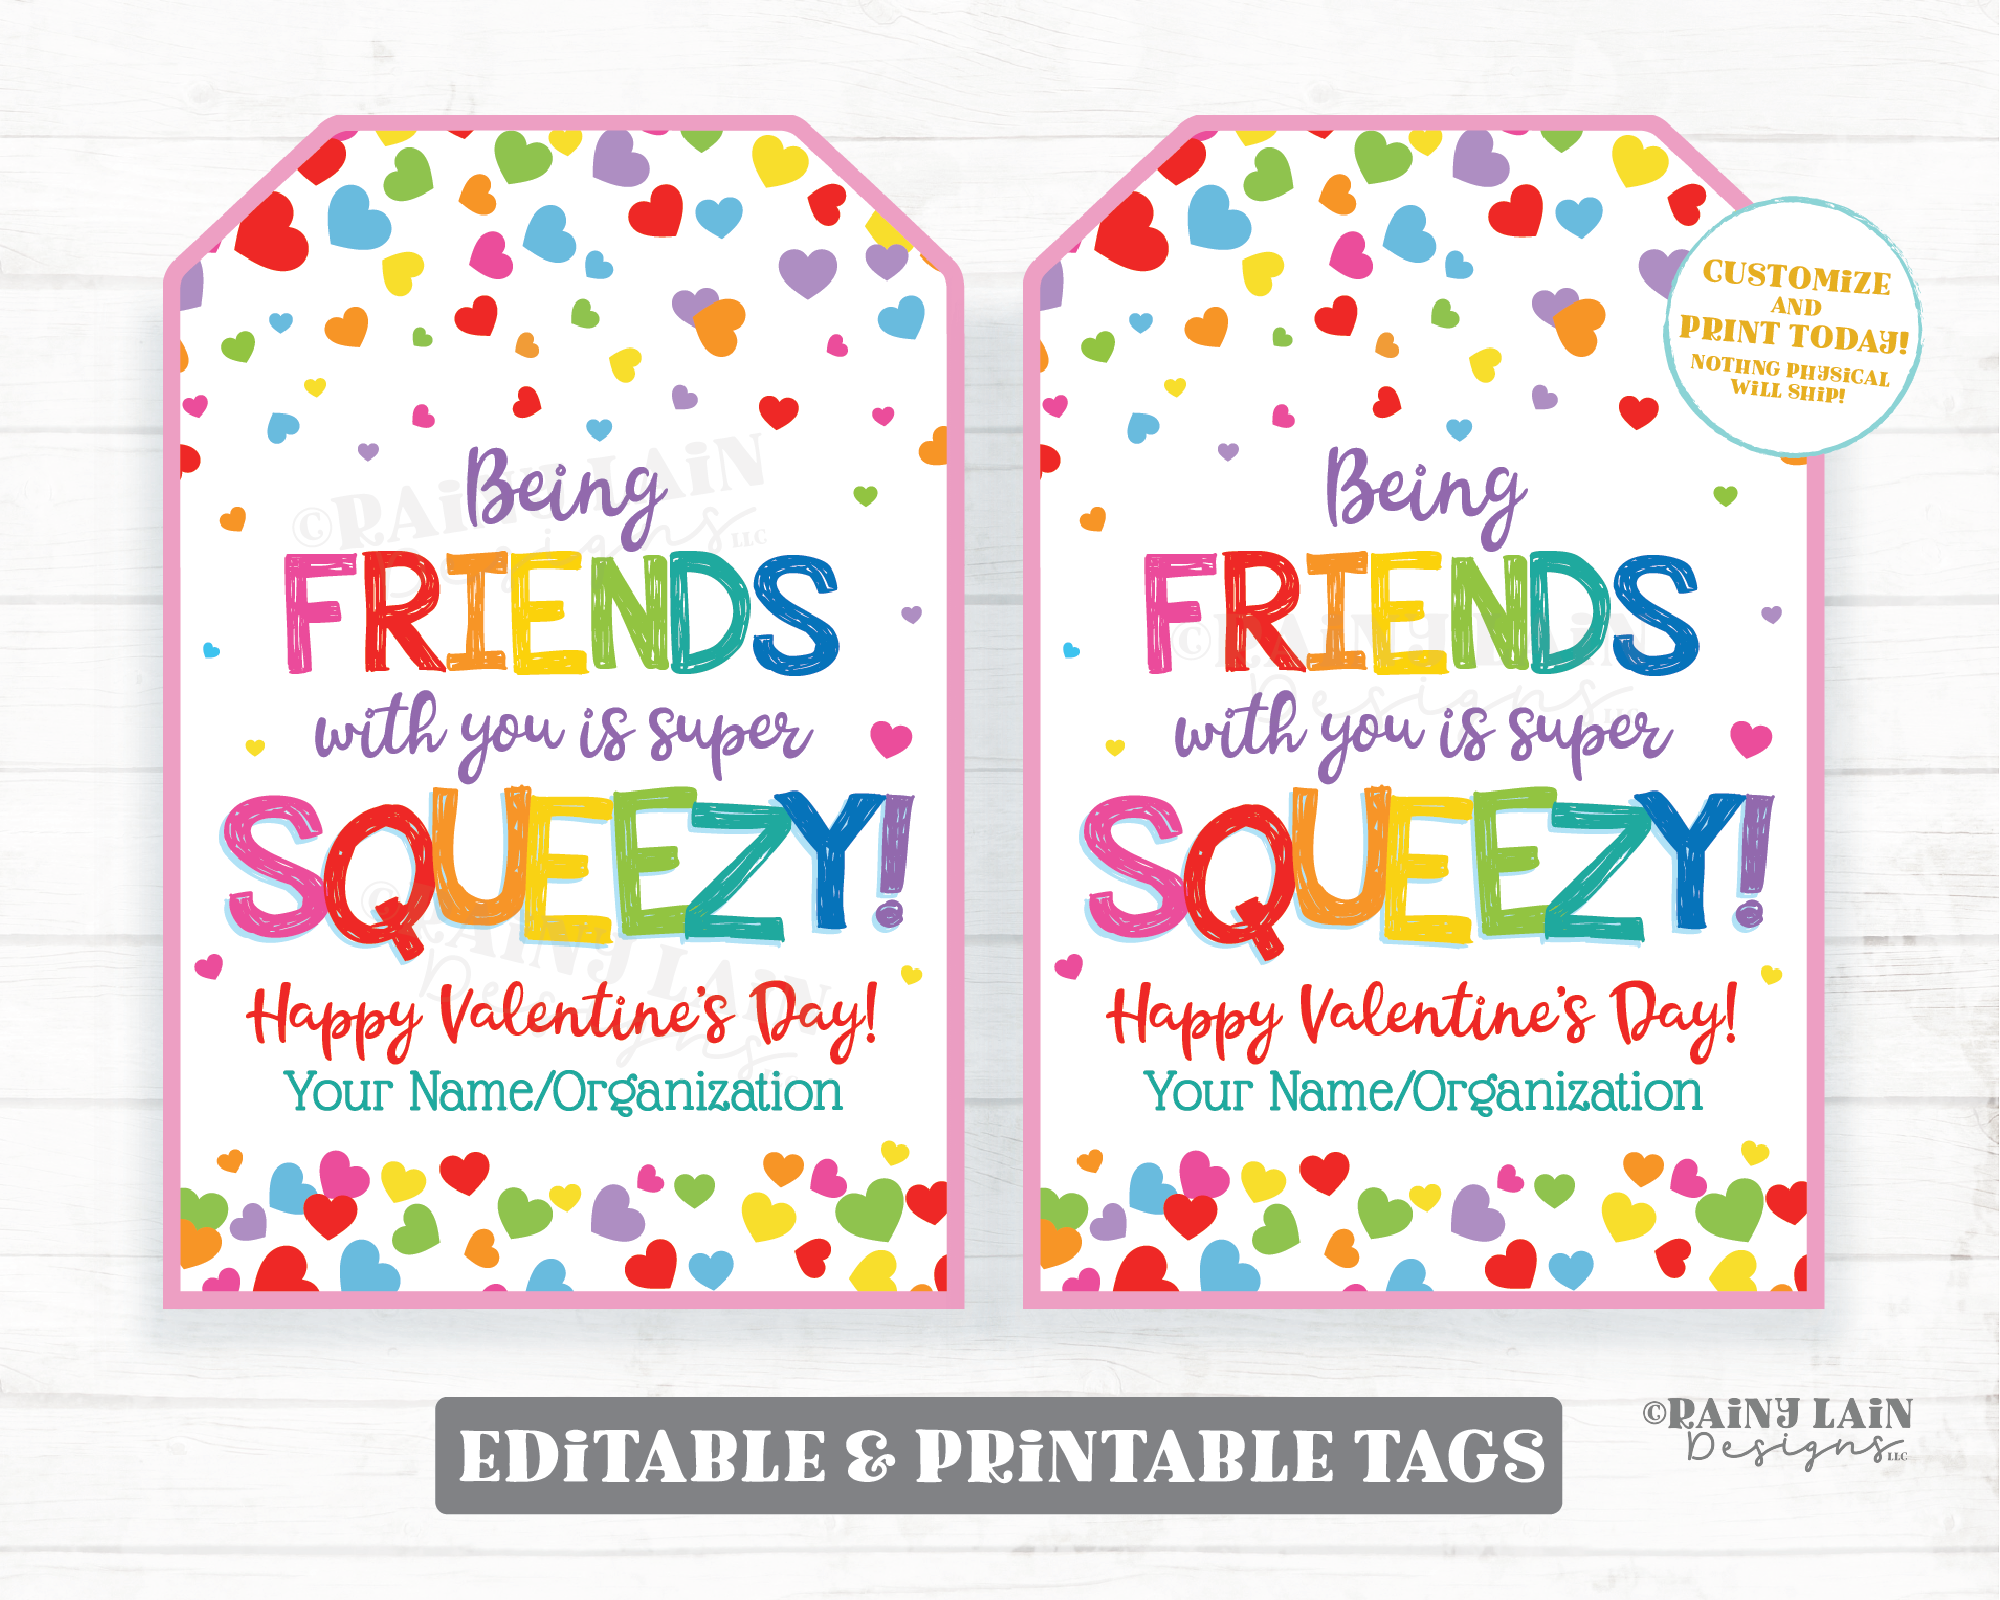 Super Squeezy Being Friends with you Valentine's Day Tag Applesauce Pouch Squishie Valentine Squishy Preschool Classroom Printable Non-Candy